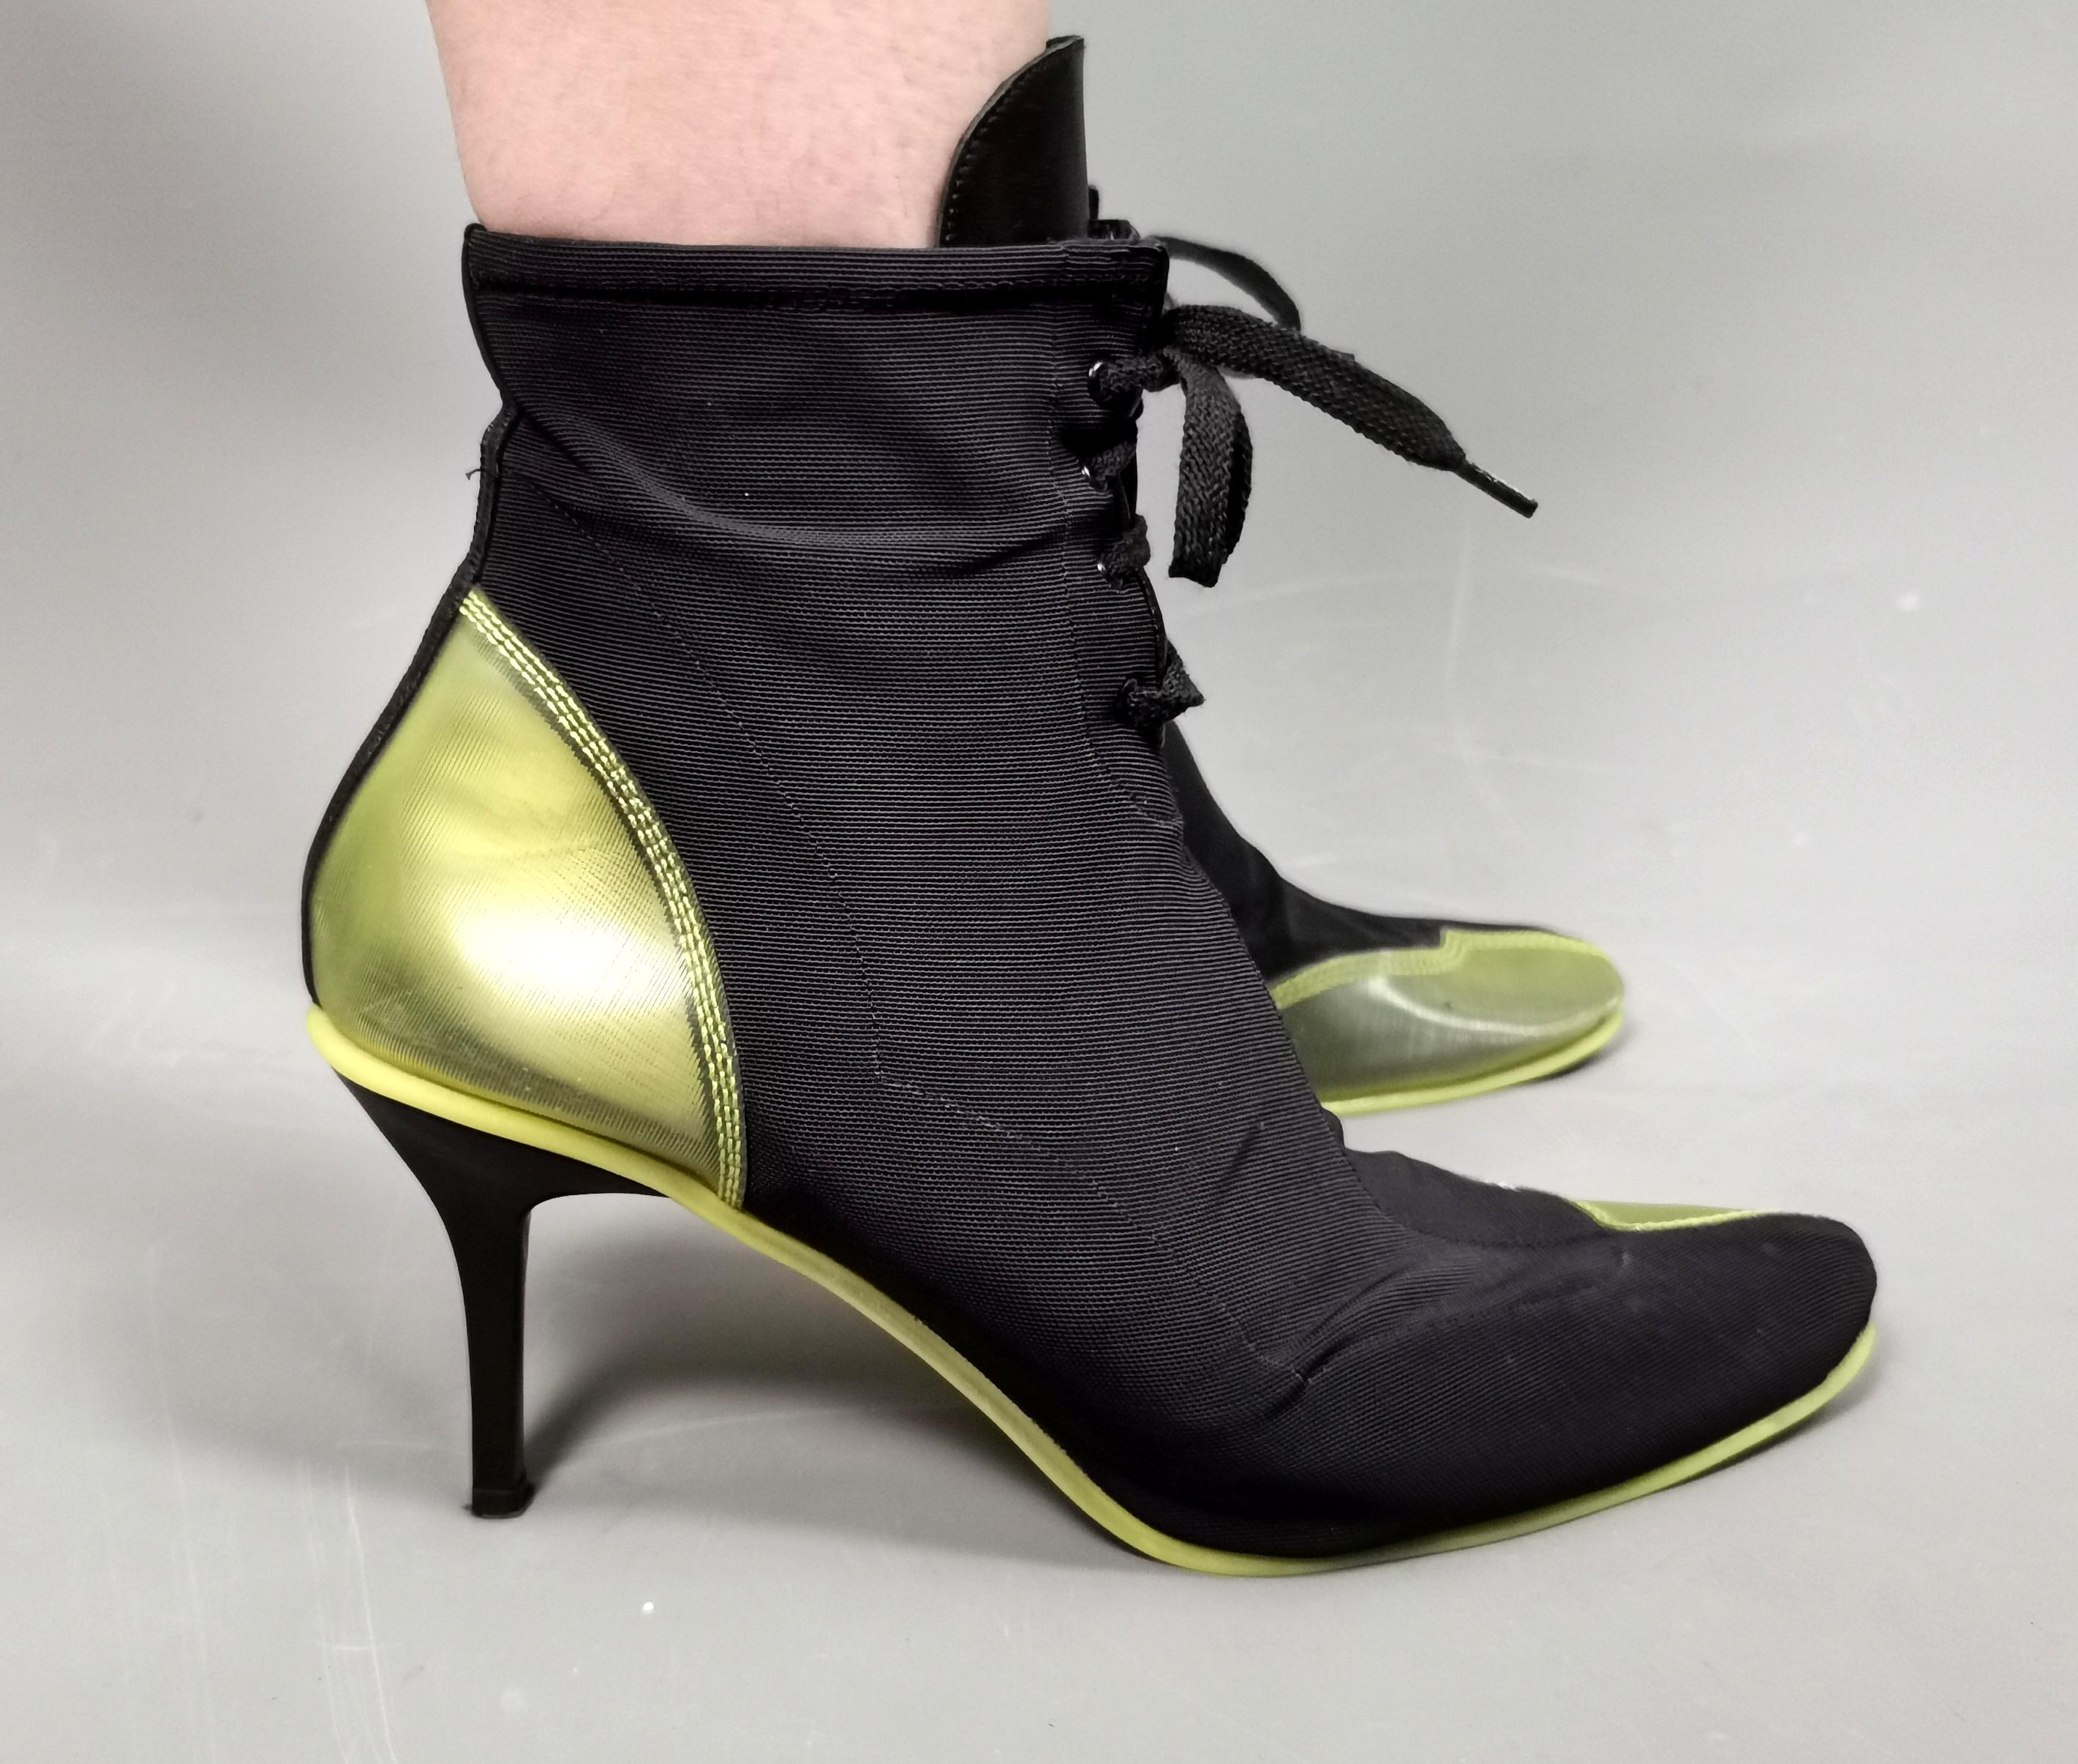 A rare pair of boxed vintage DKNY sneaker boots.

They are high heeled boots in a stretchy black canvas with a neon yellow rubber heel and half toe design which is slightly see through.

The boots have textured neon yellow soles.

They come in the